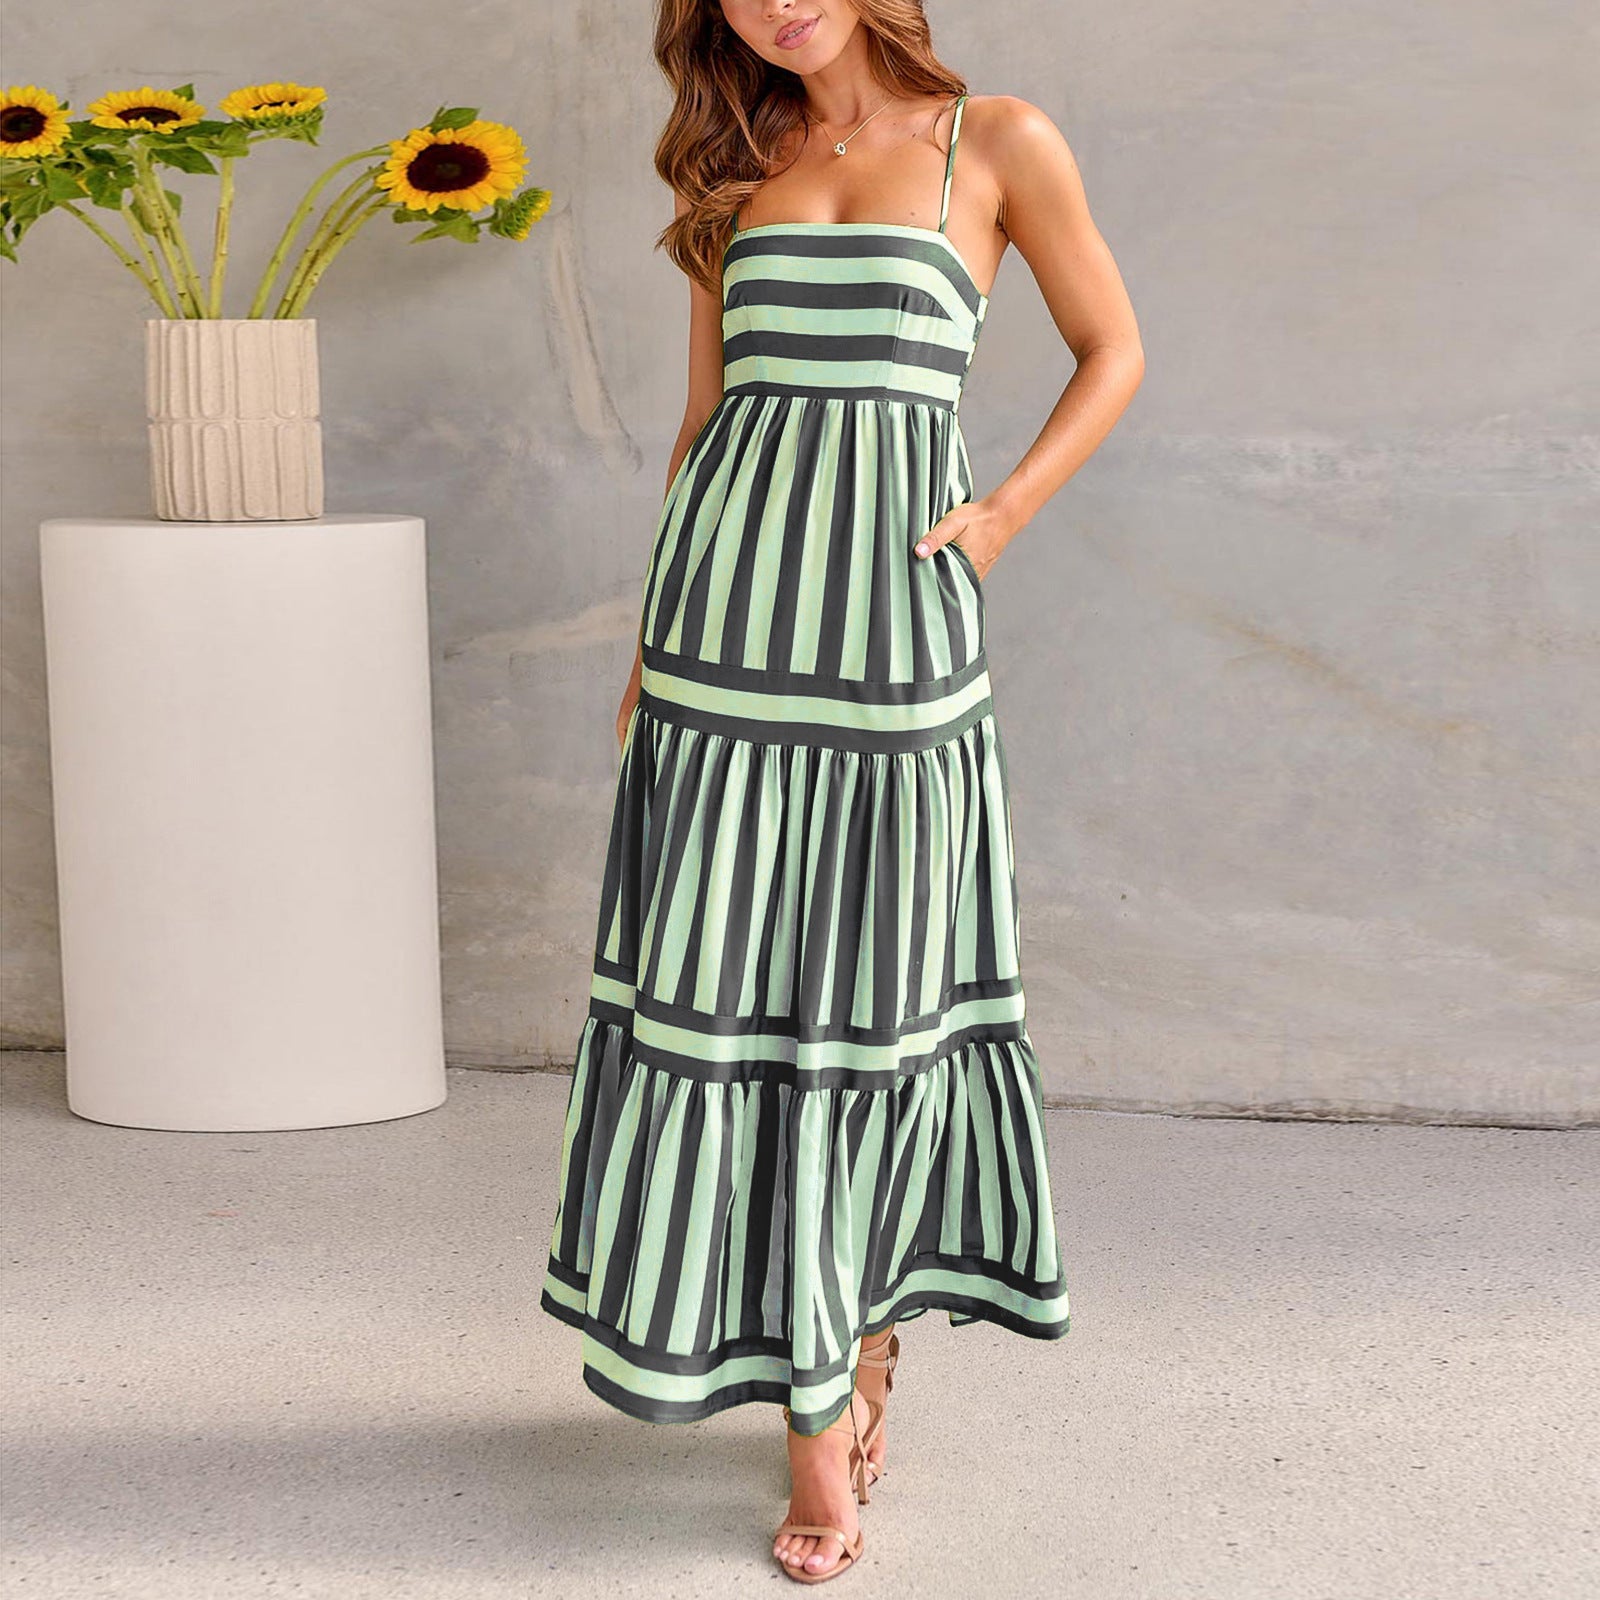 Summer Striped Printed Suspender Long Dress With Pockets Fashion Square Neck Backless Dresses For Beach Vacation Women Clothing